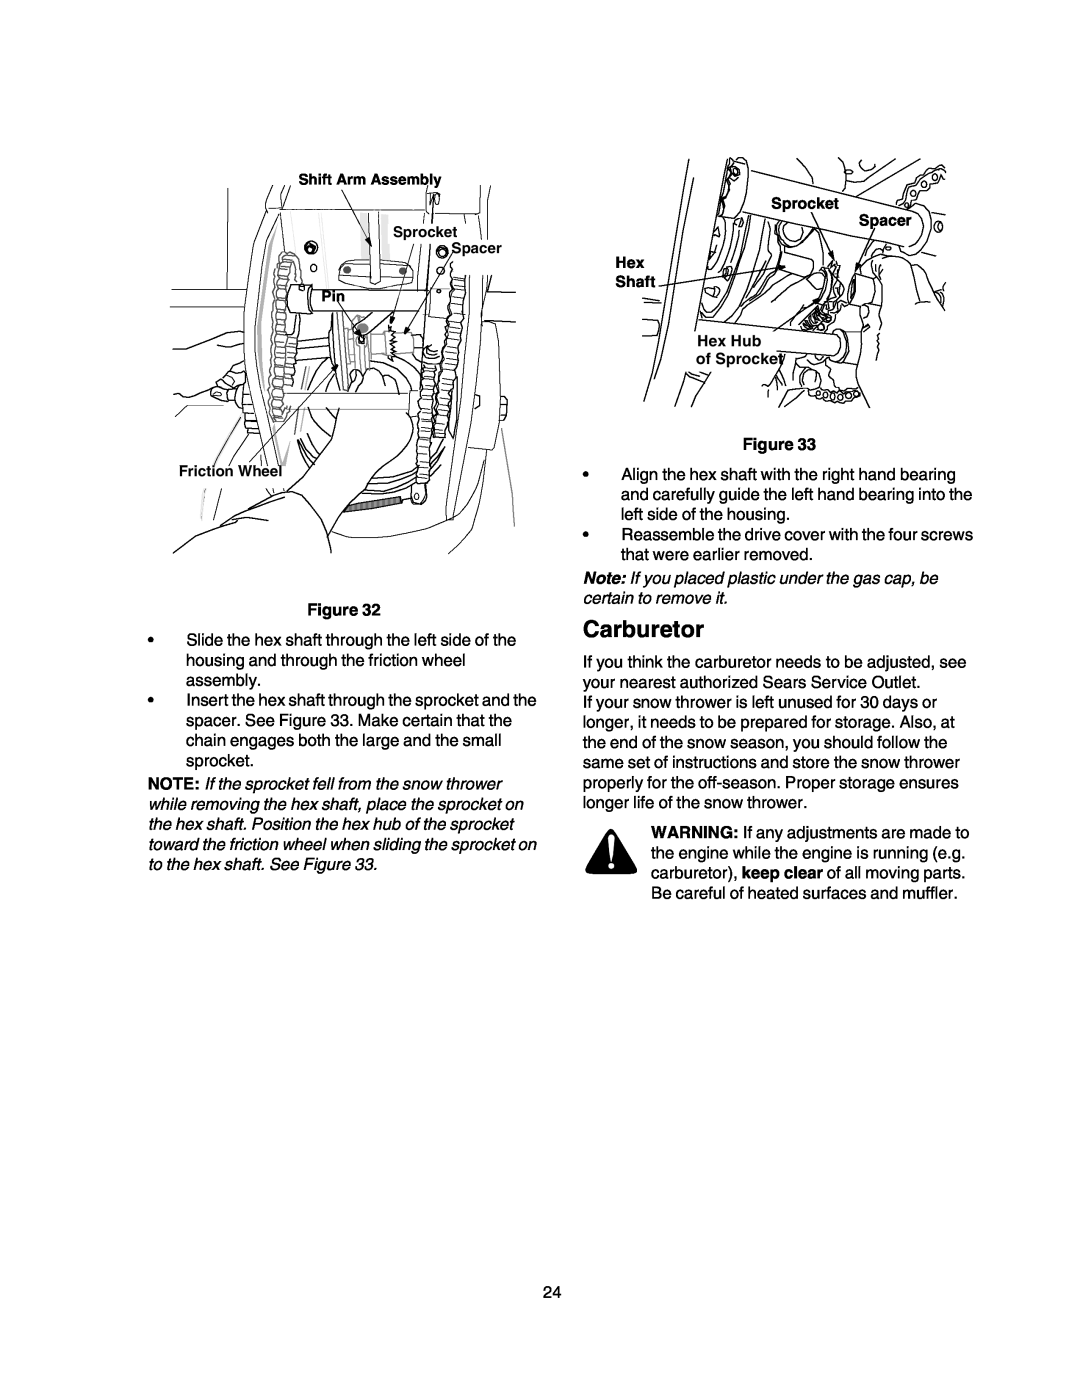 Craftsman 247.88853 owner manual Carburetor, Note If you placed plastic under the gas cap, be certain to remove it 